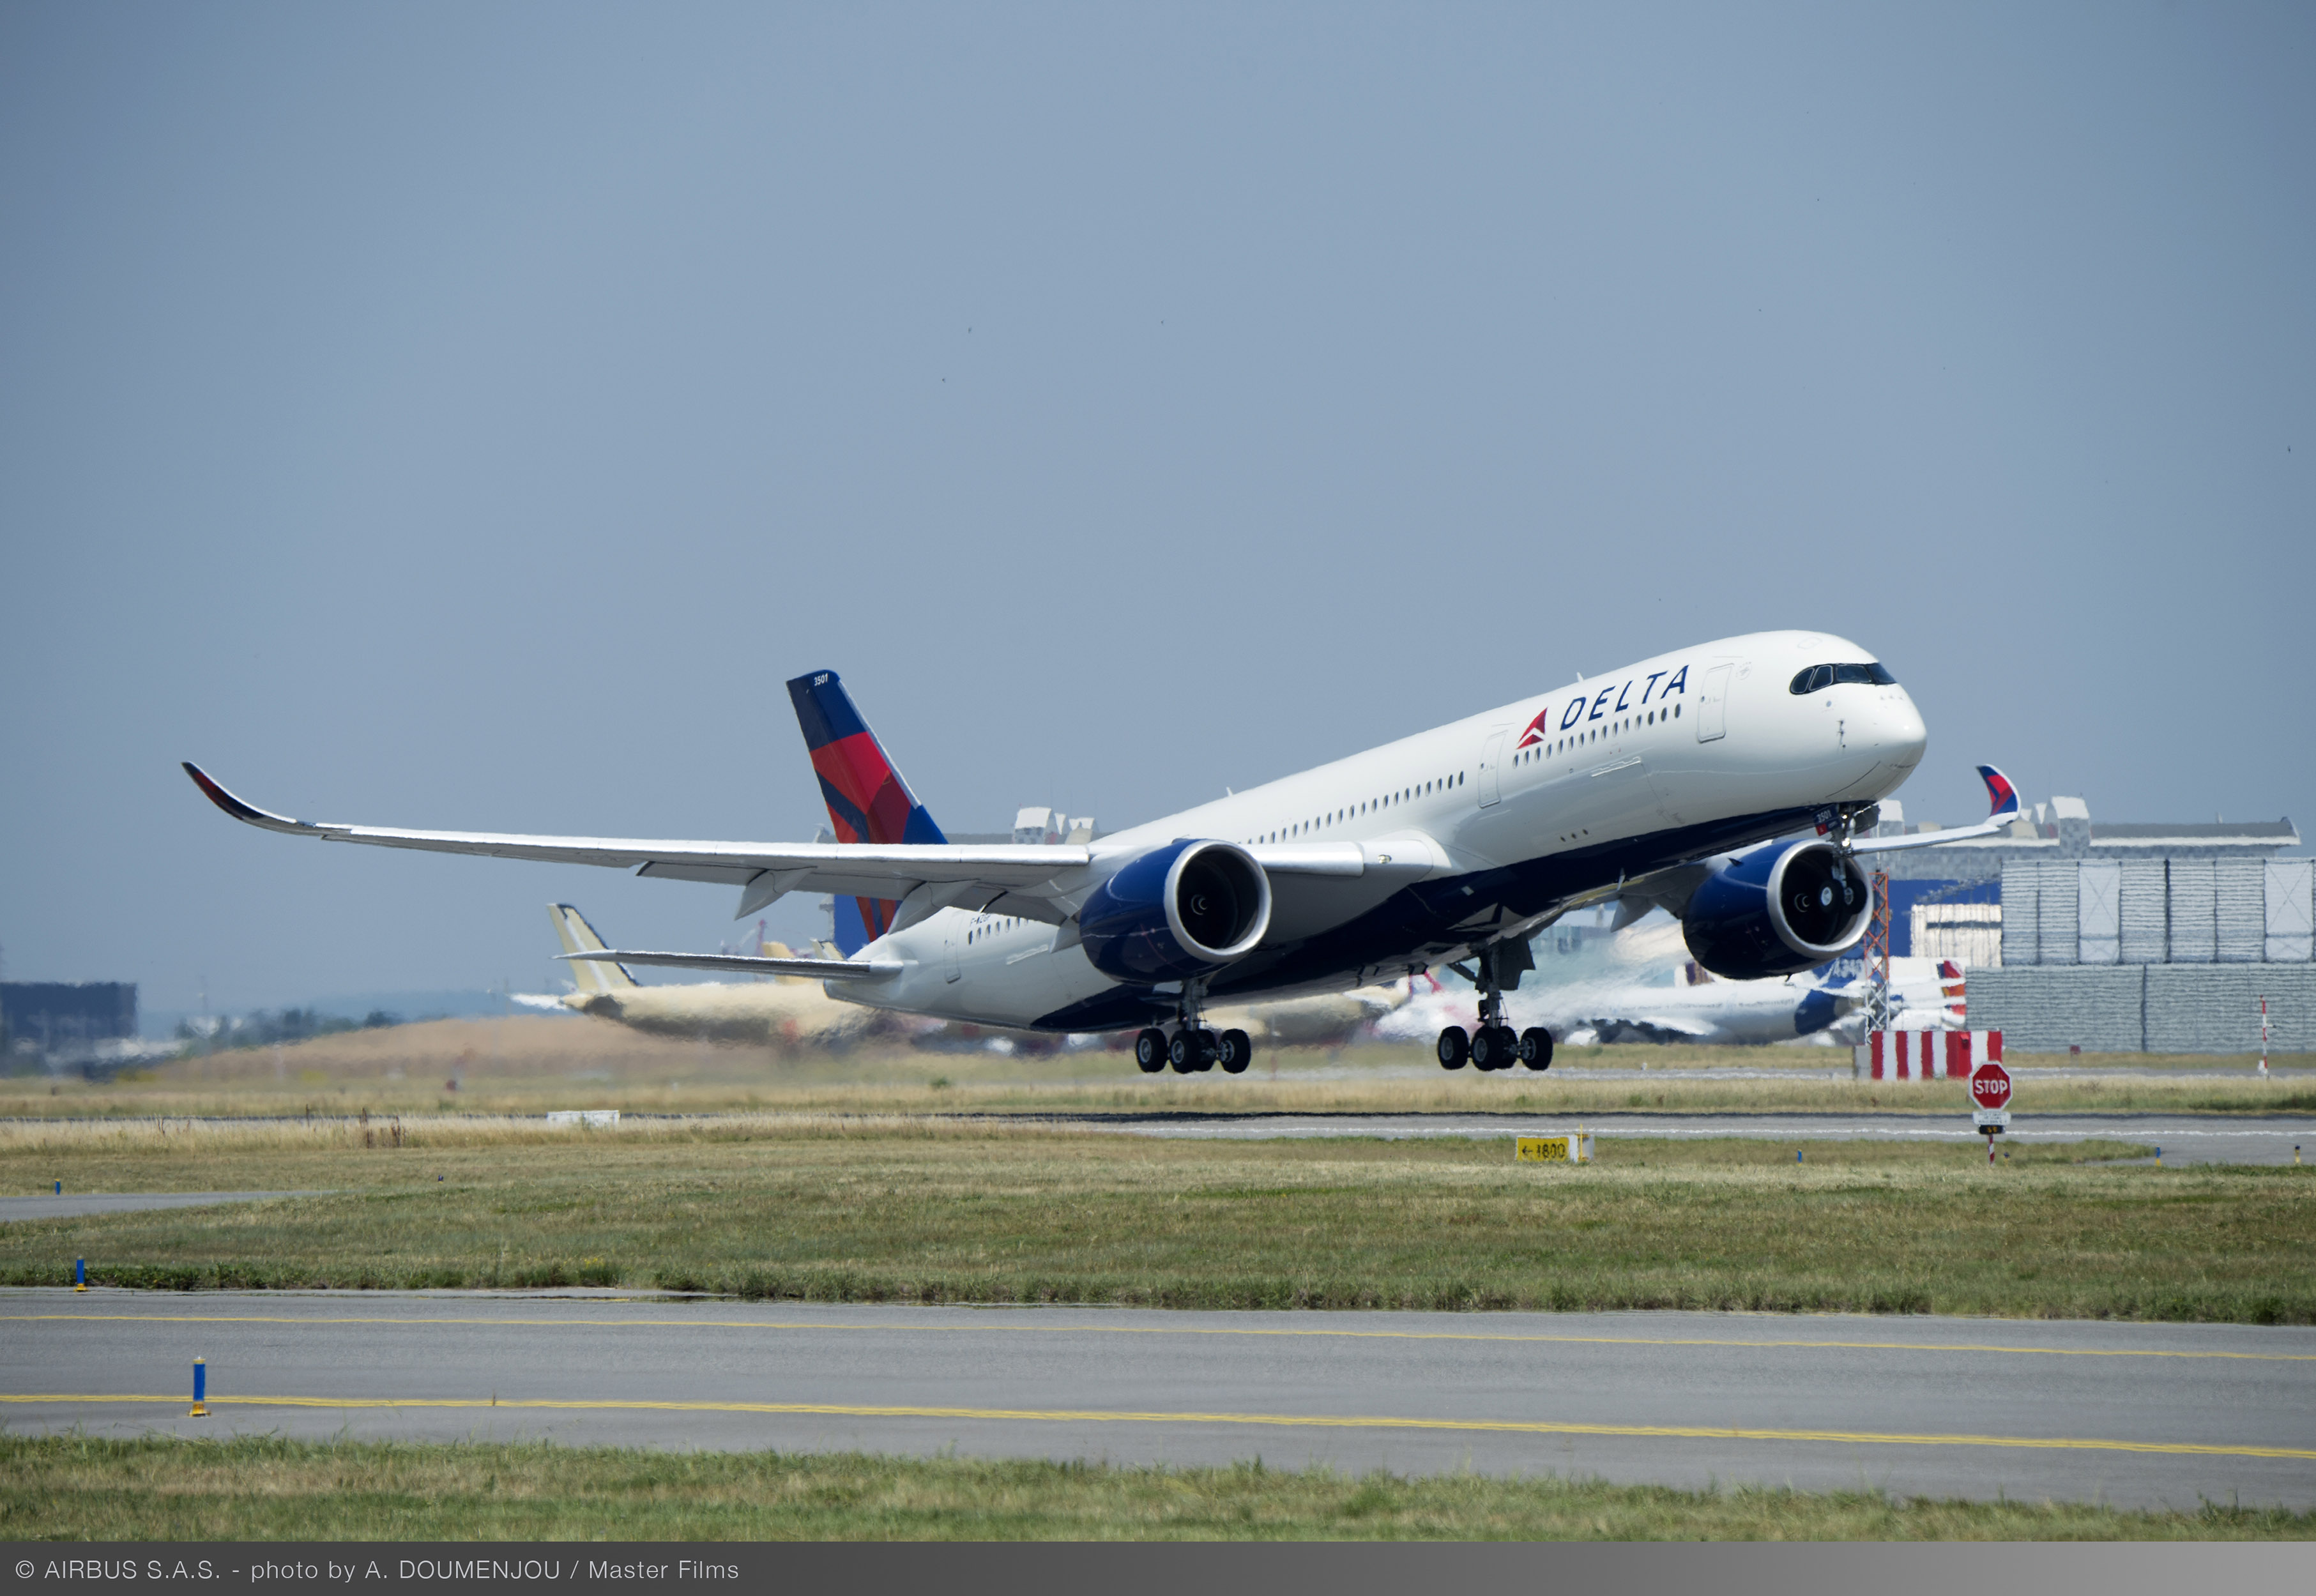 Delta Cyber Monday Sale Discounted Award Redemptions Deals We Like